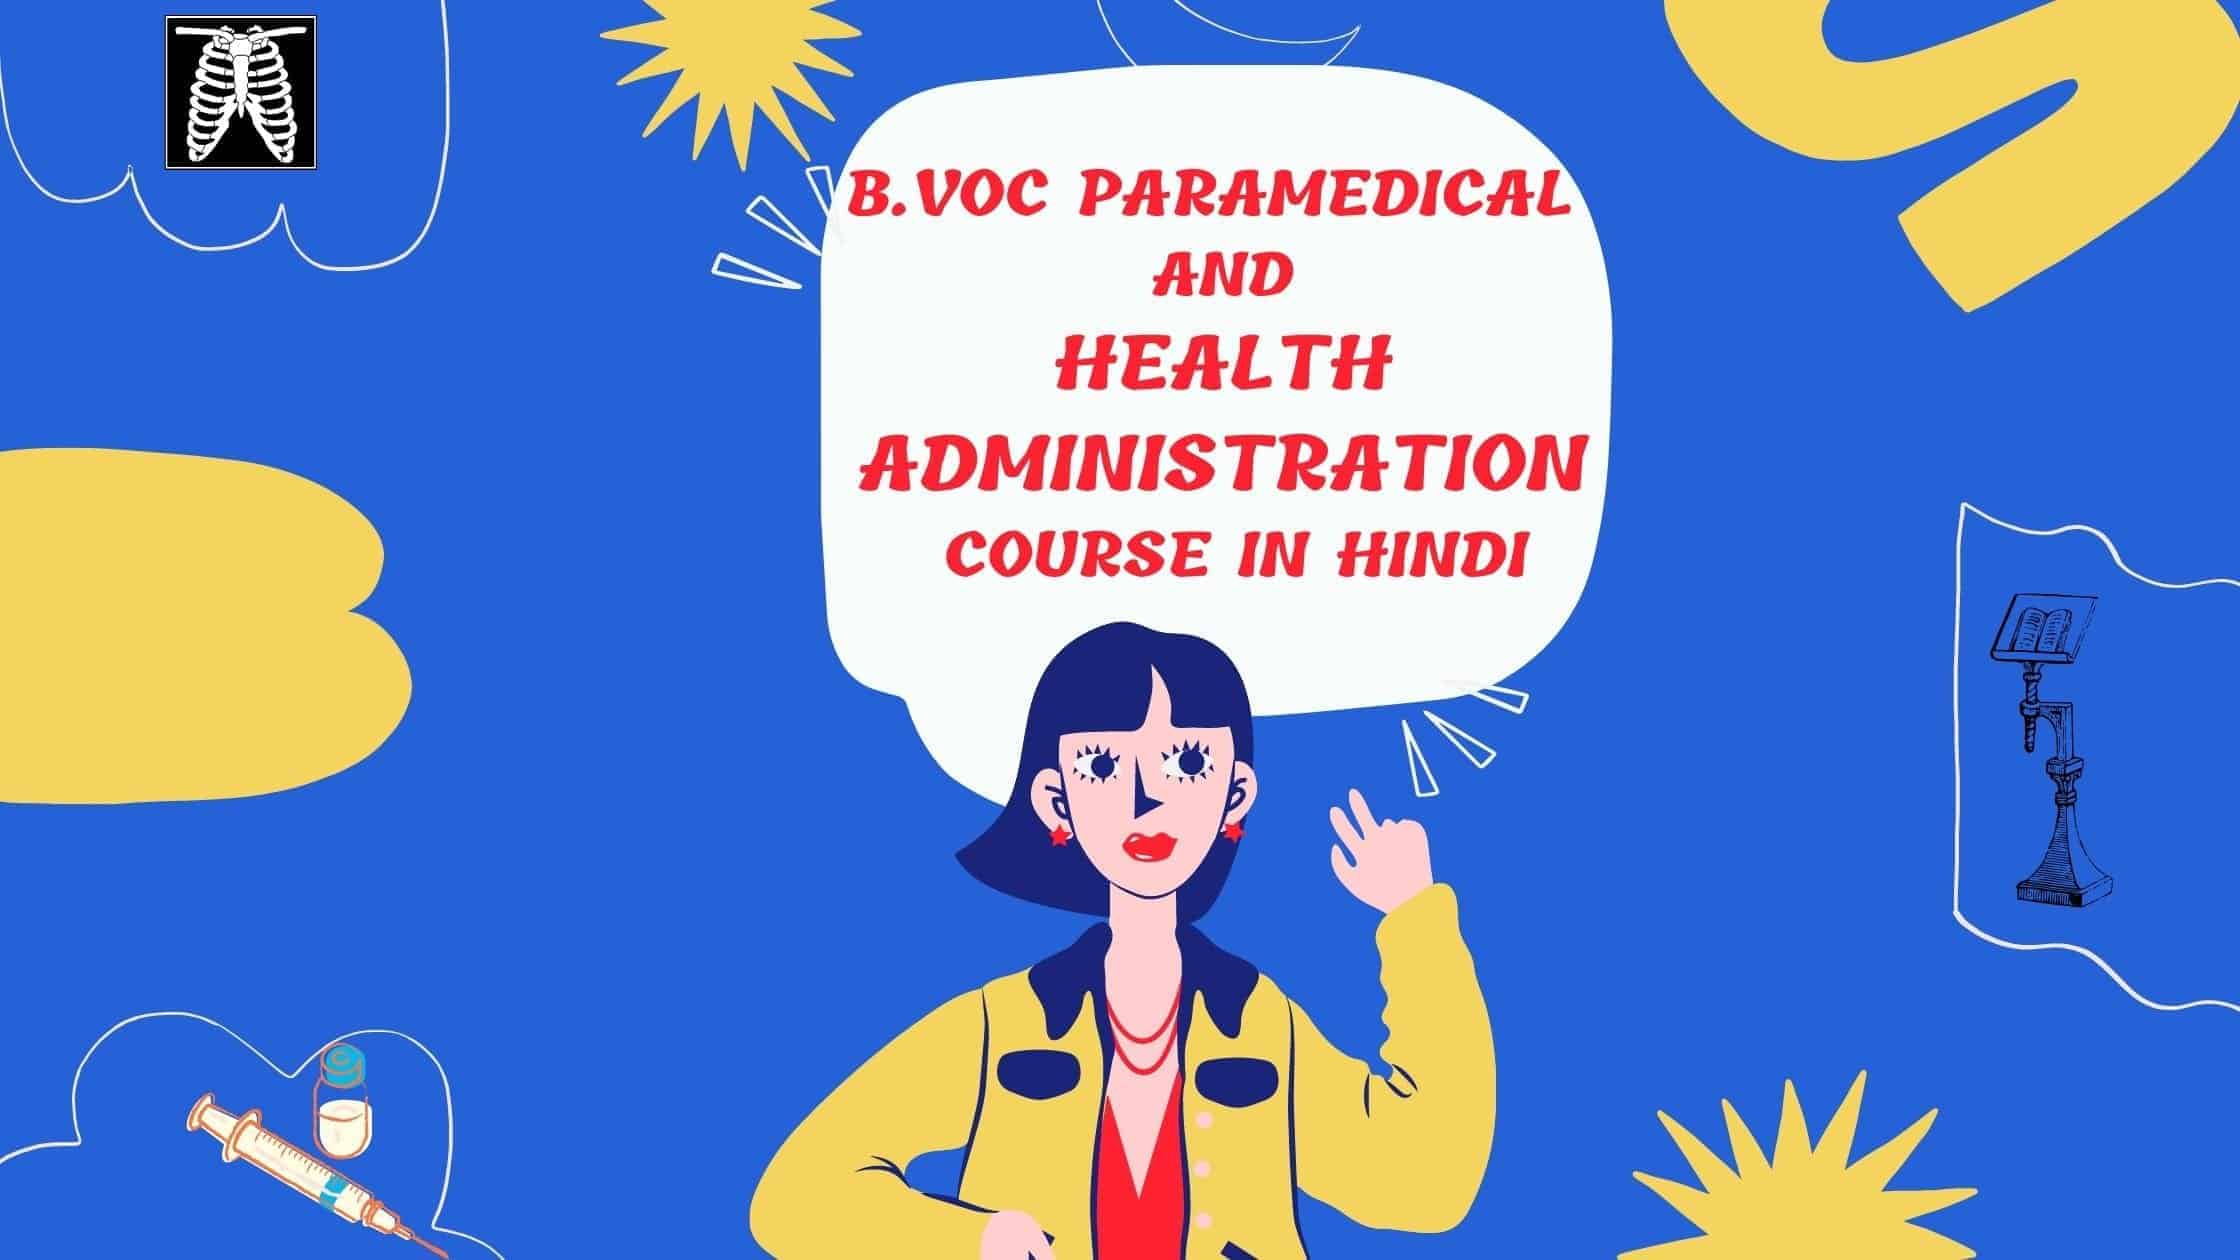 B.Voc Paramedical and Health Administration Course in Hindi